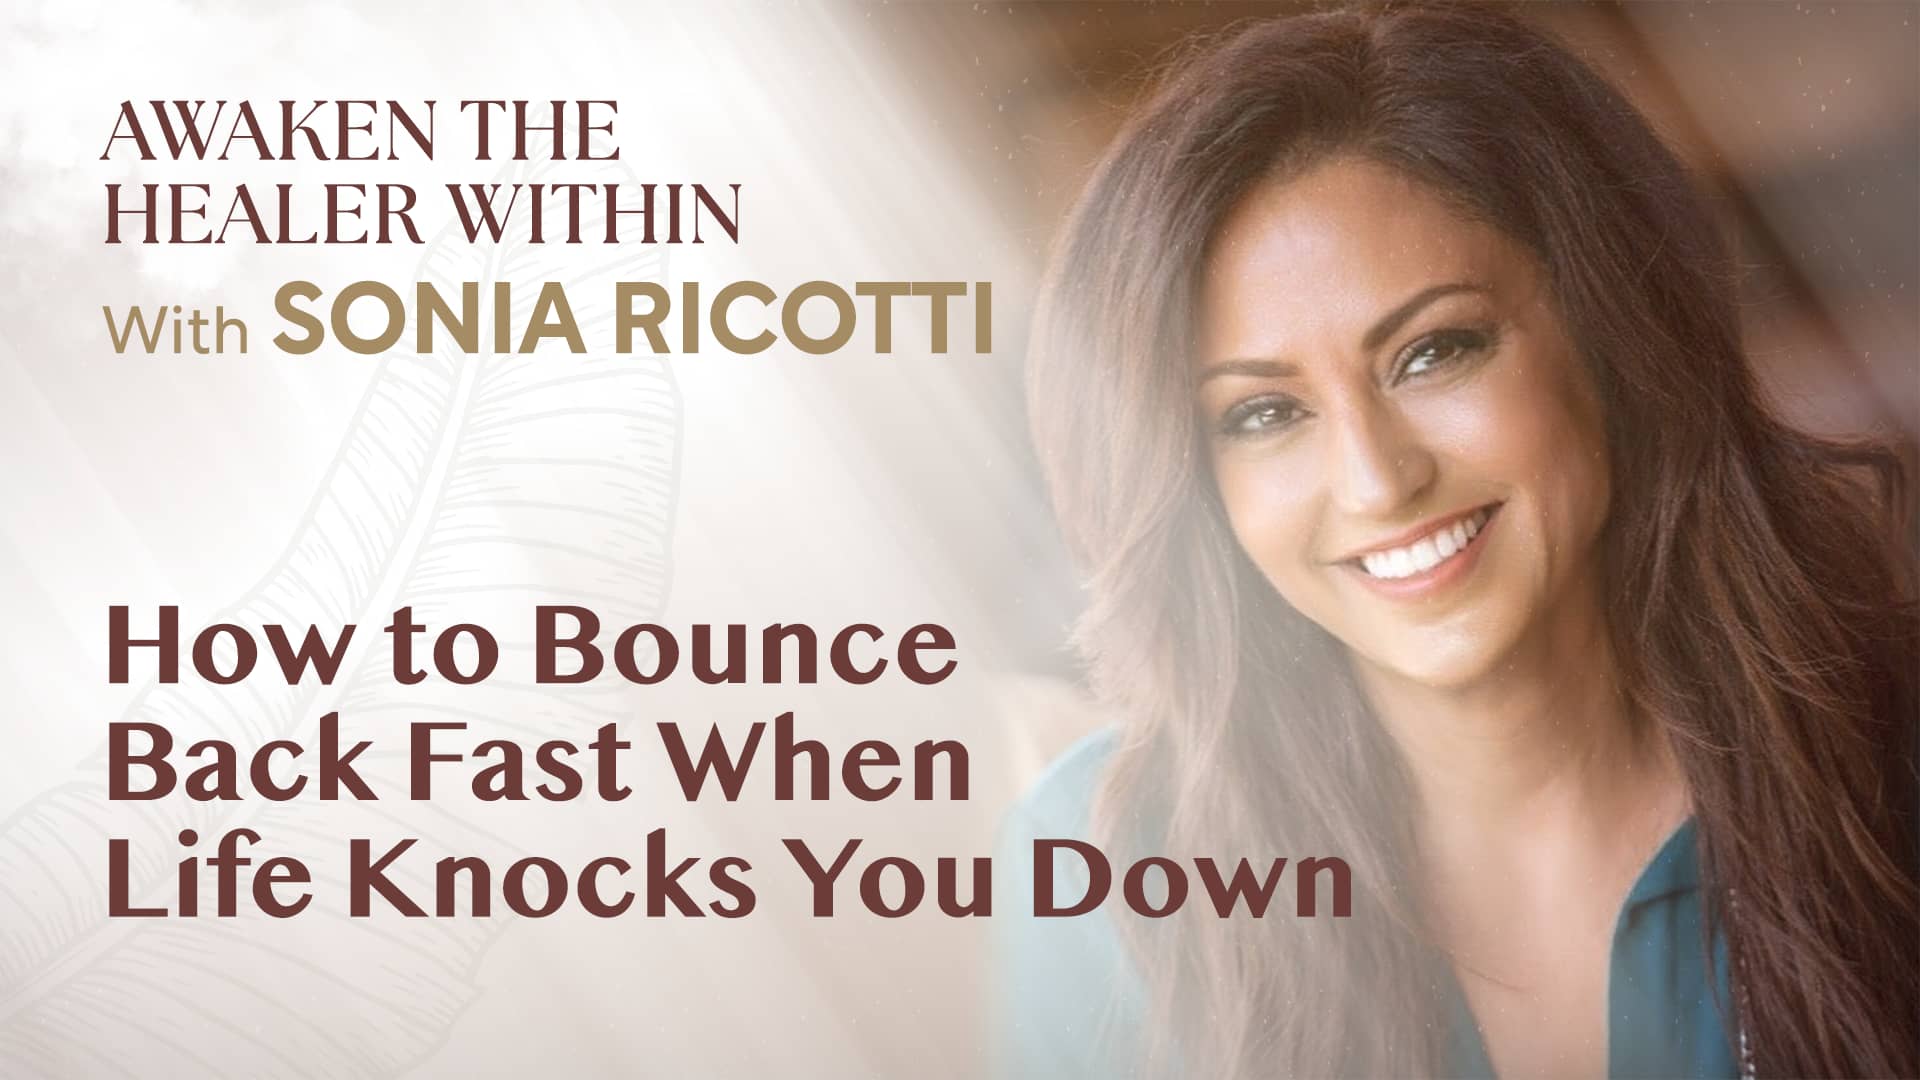 How to Bounce Back Fast When Life Knocks You Down